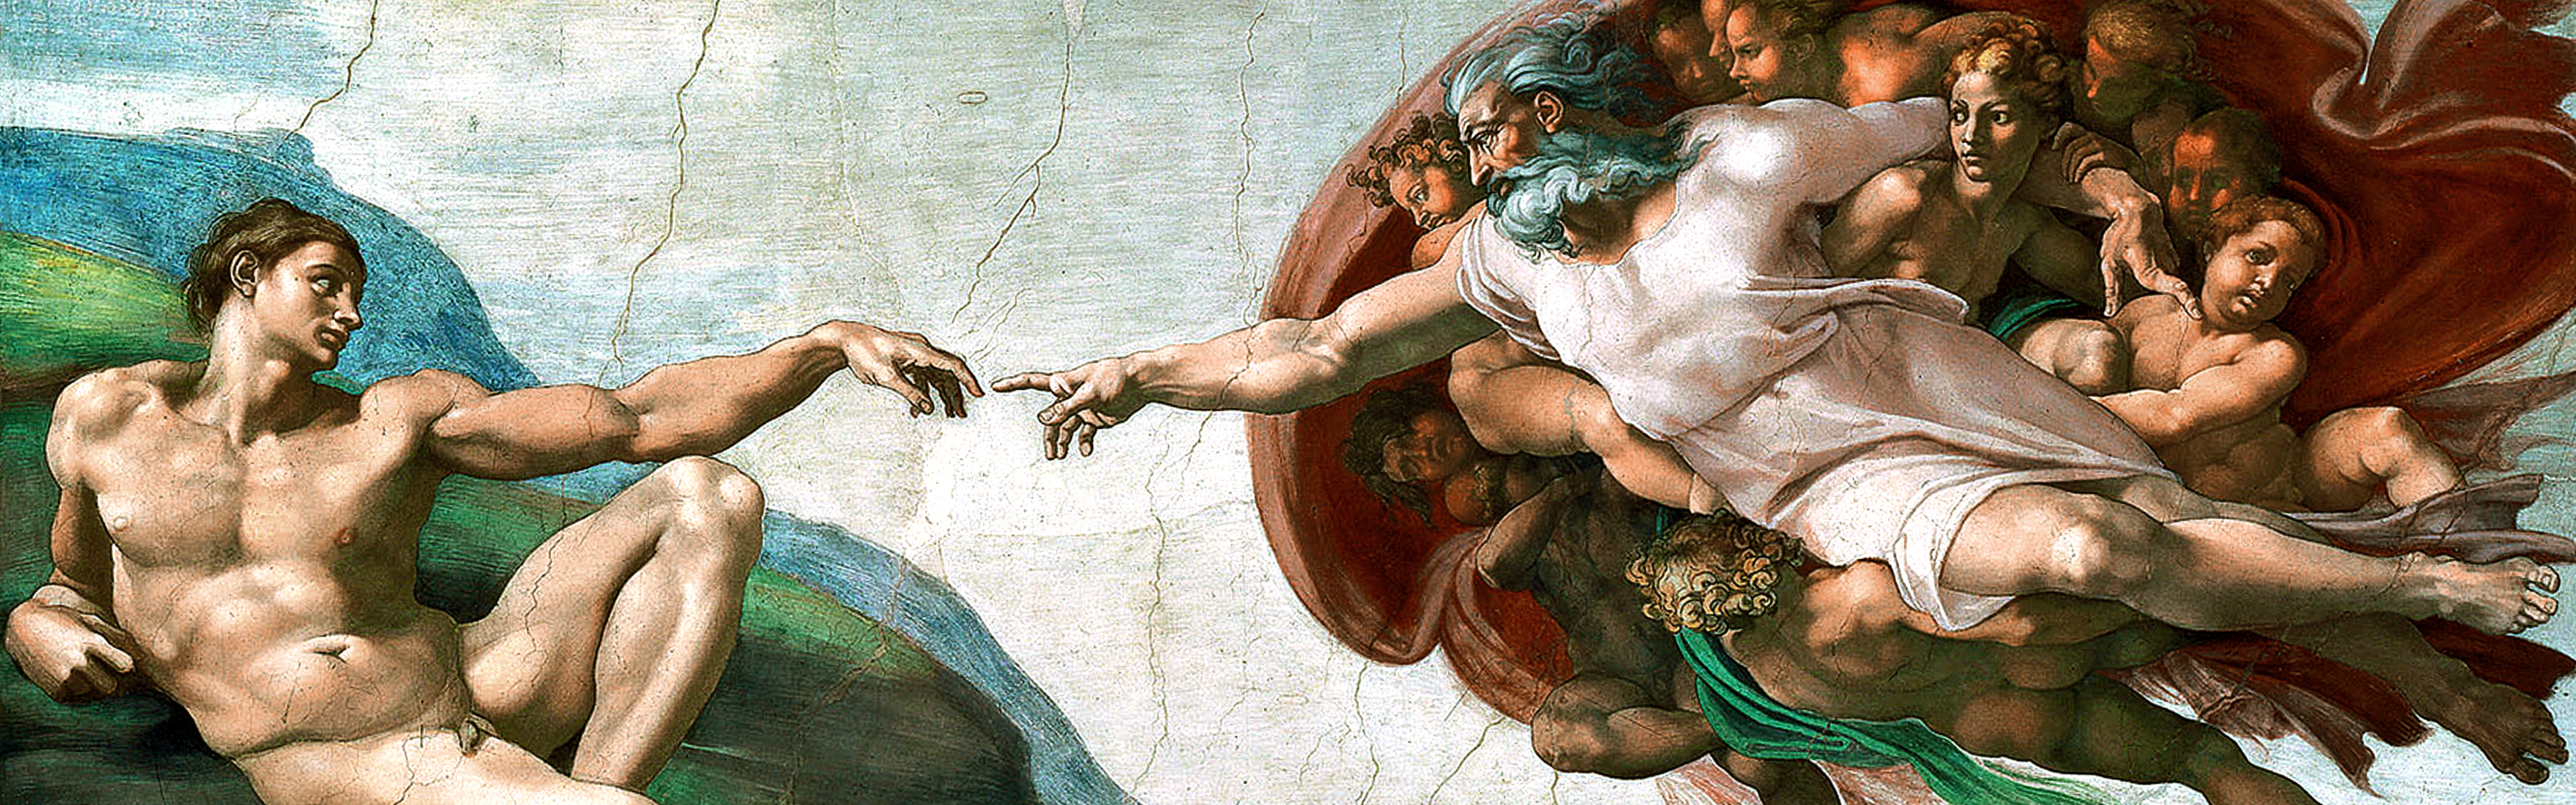 creation painting michelangelo